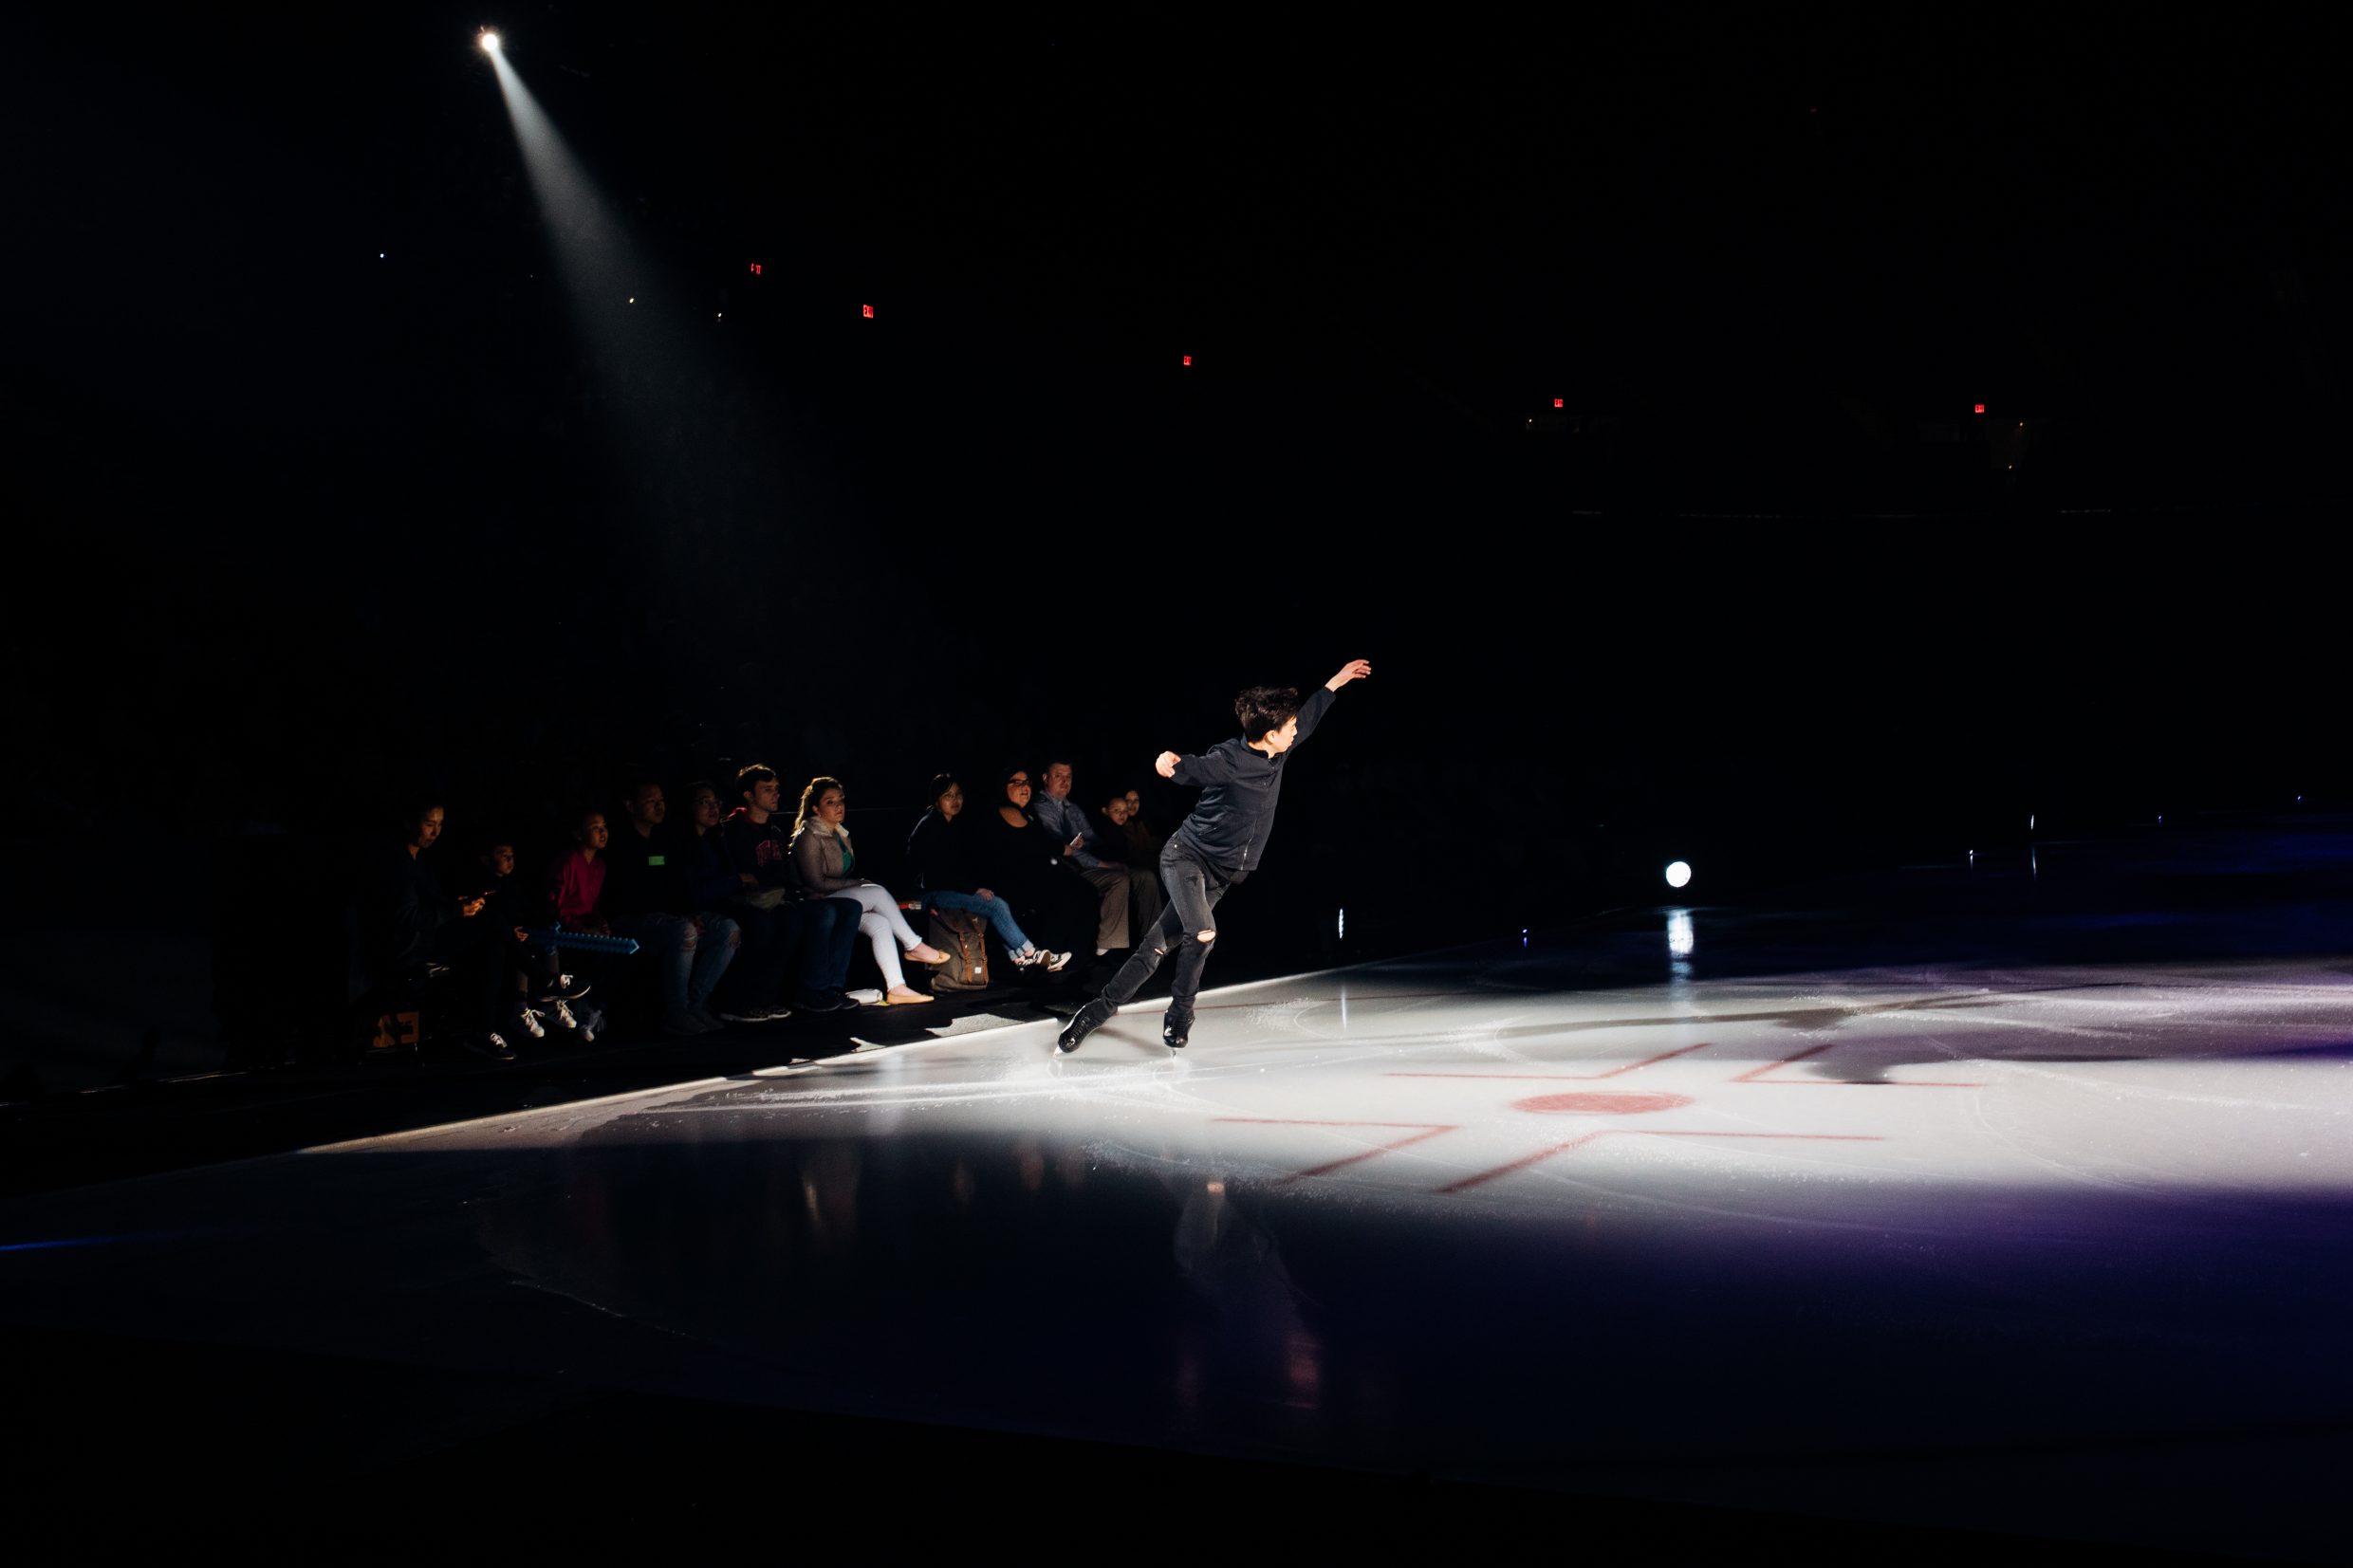 Vincent Zhou skates to a medley of Crouching Tiger Hidden Dragon and Made in China at Stars on Ice in Long Island